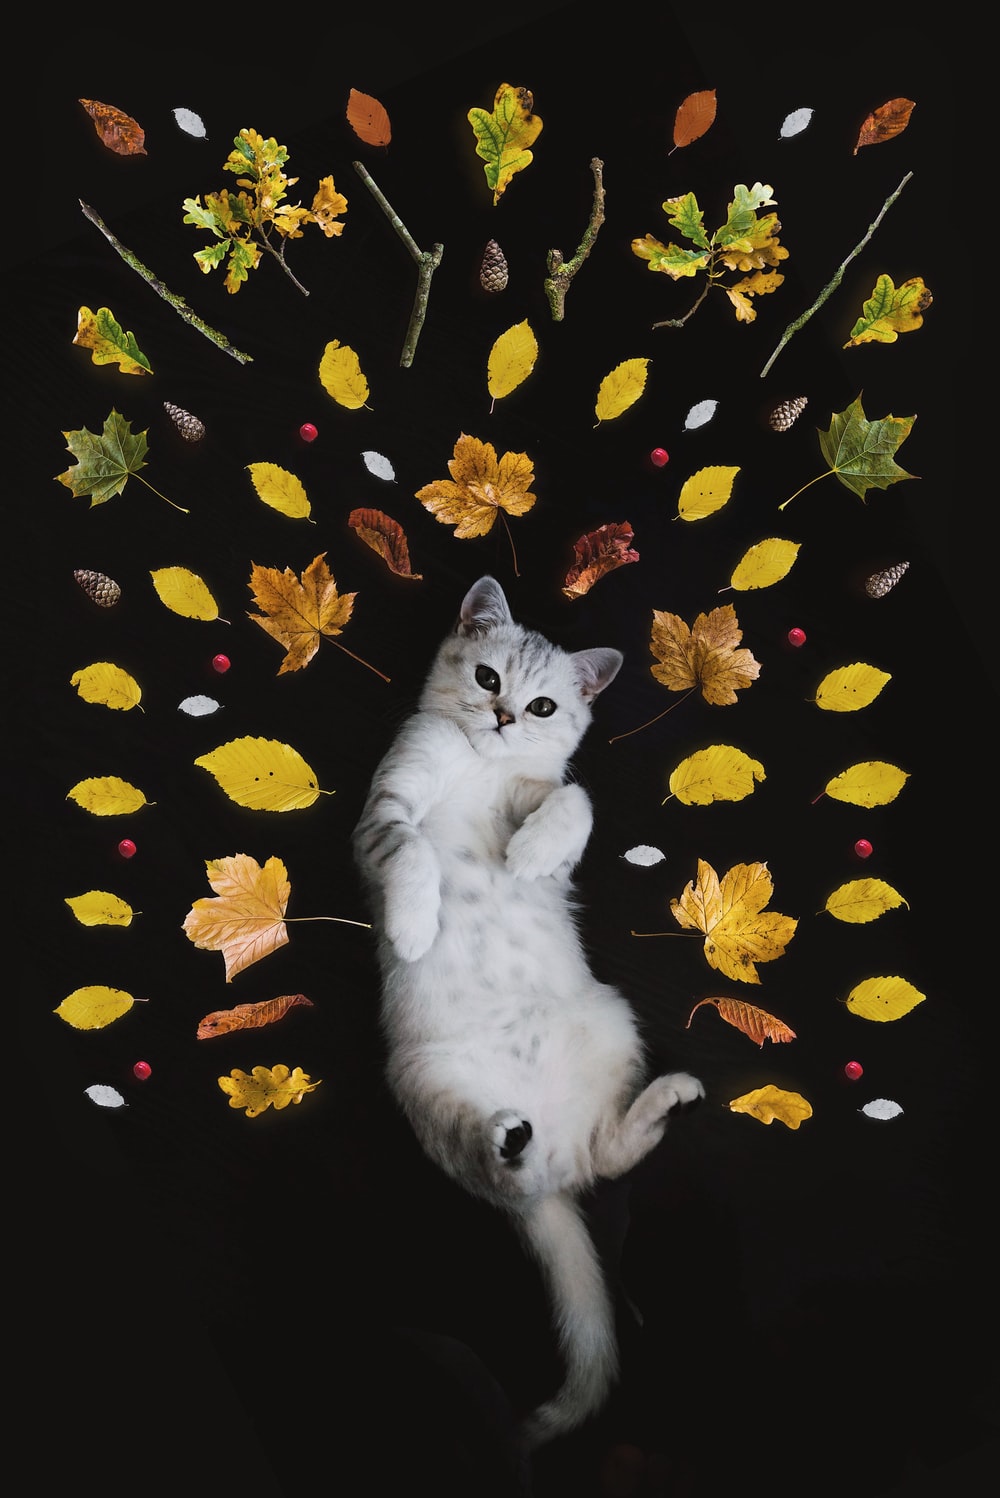 Cat Art Picture. Download Free Image